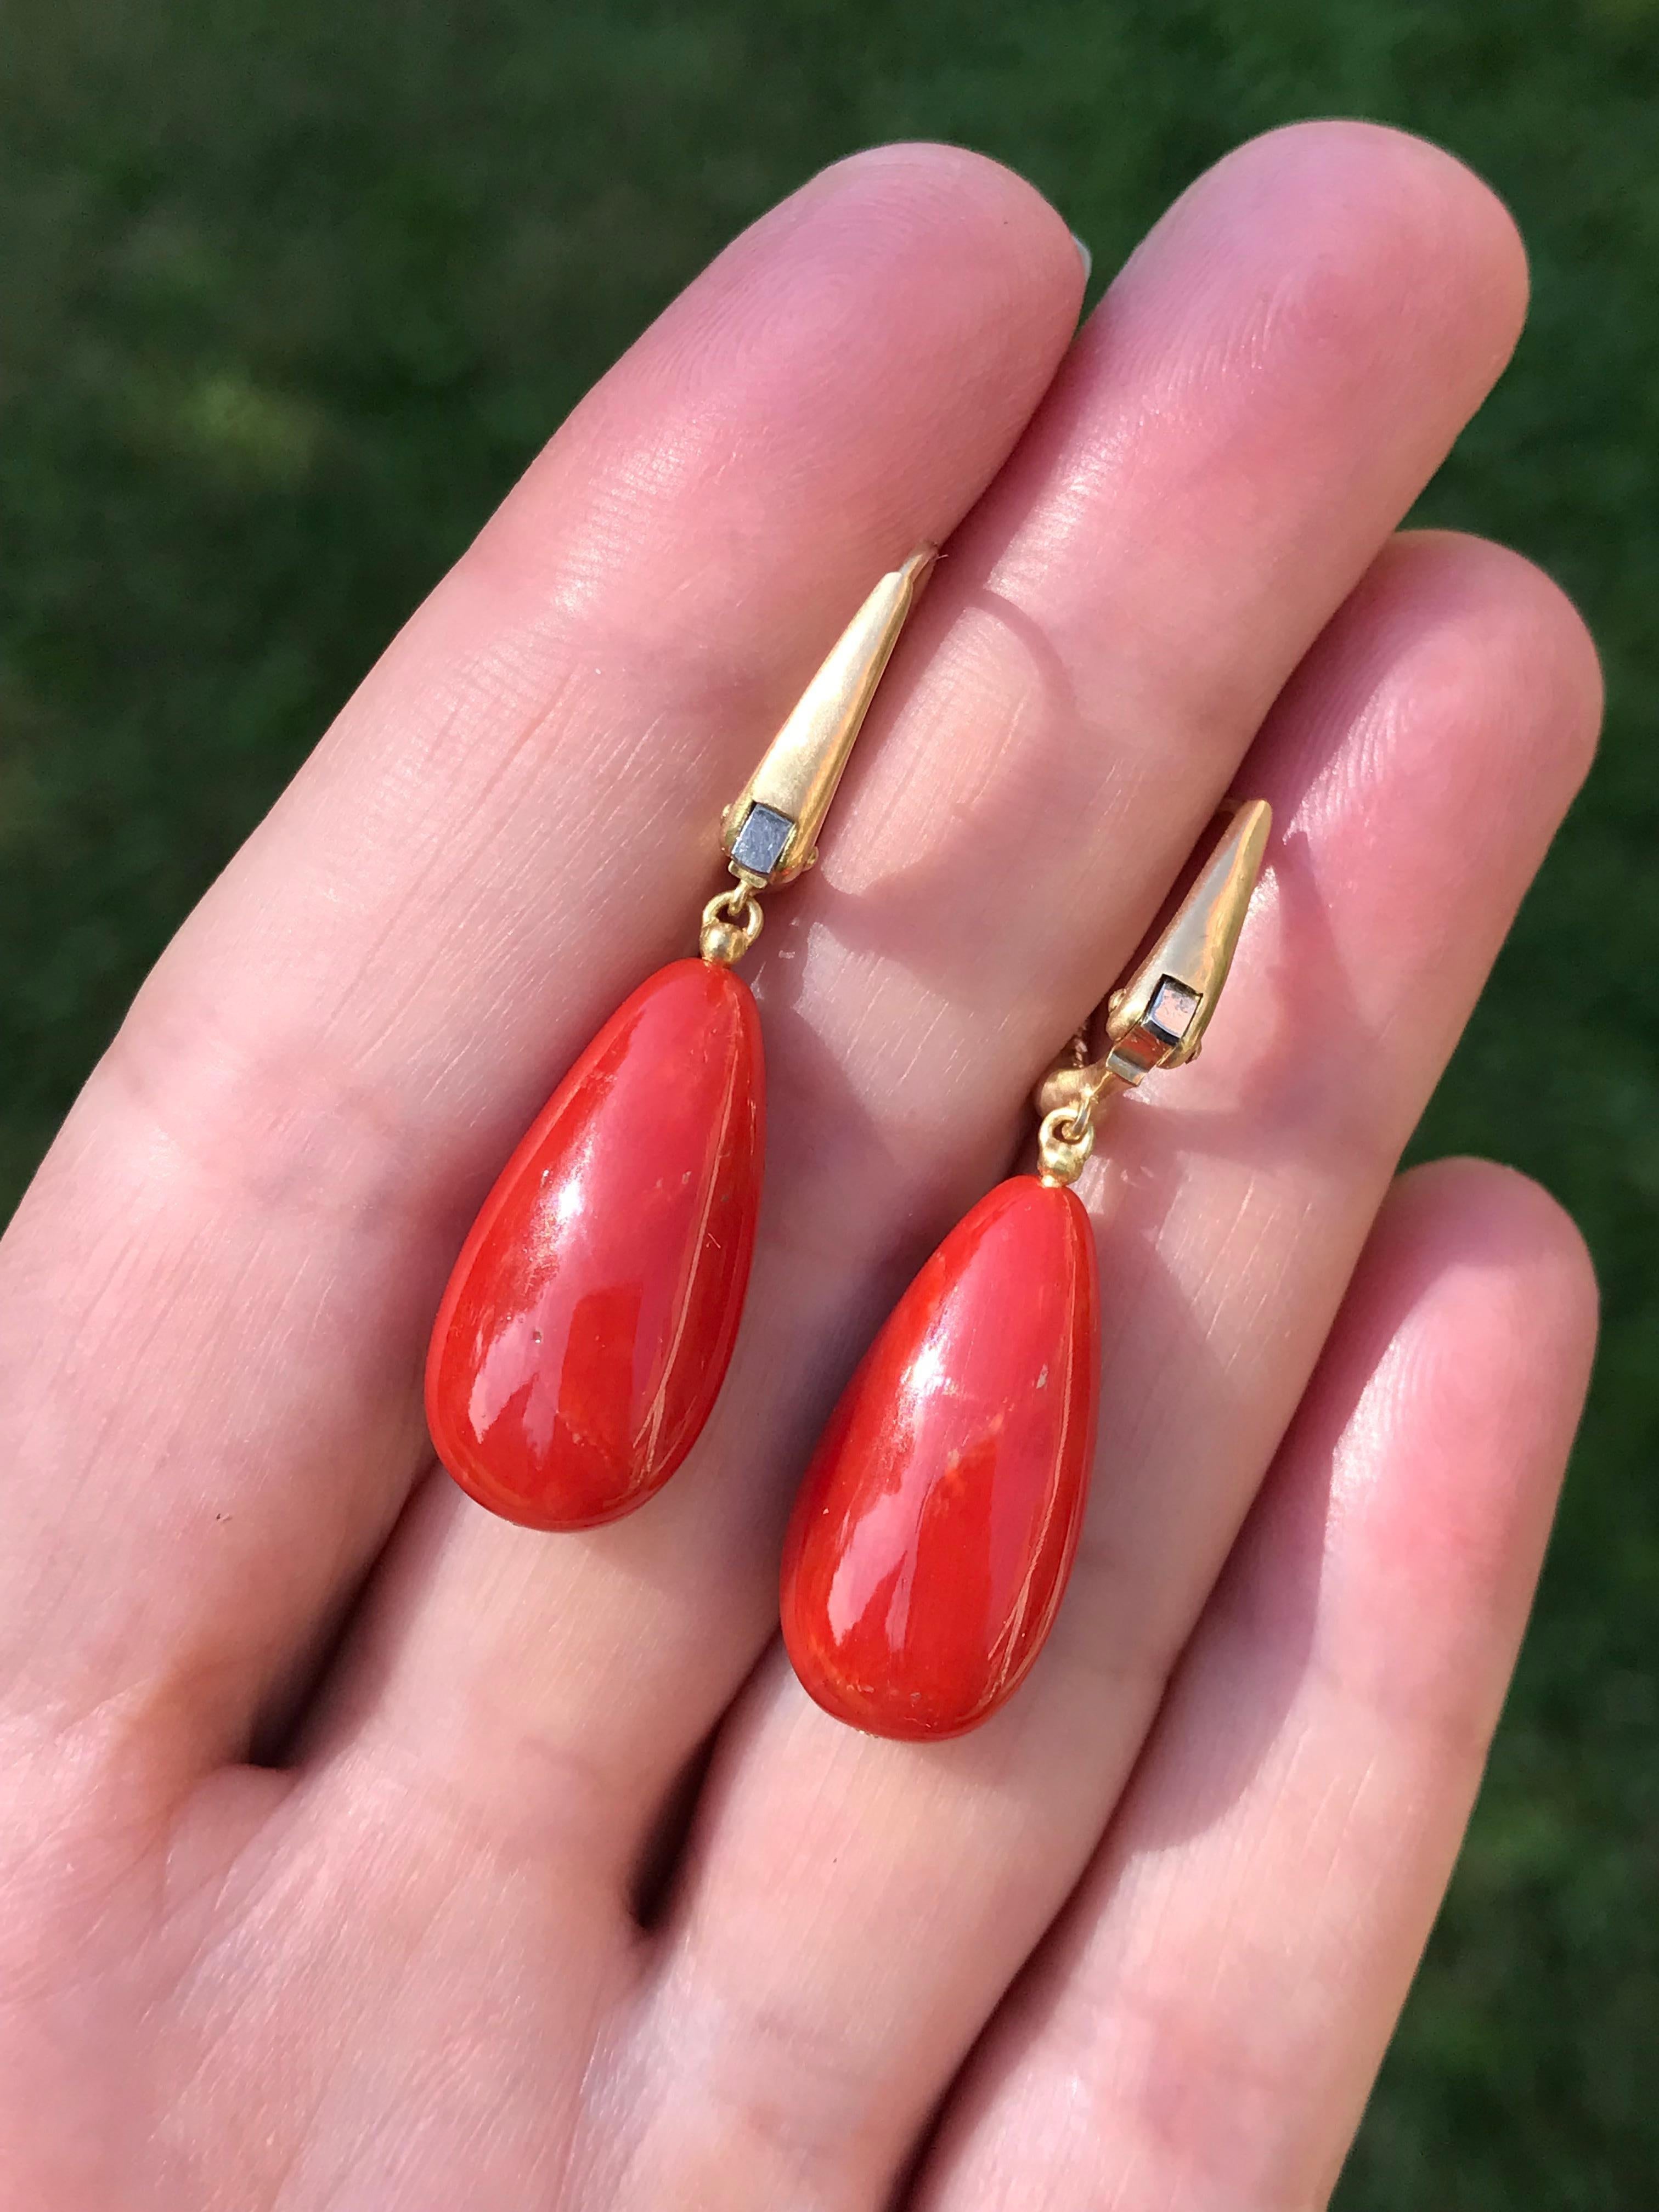 Dalben design 18 kt semi-lucid finished yellow gold earrings with two long drop shape Mediterranean Red Coral 10,8 x 21,4 mm  weight 23 carat . 
Earrings dimension :  
width 10,8 mm 
height with leverback 37,6 mm  
The earrings has been designed and